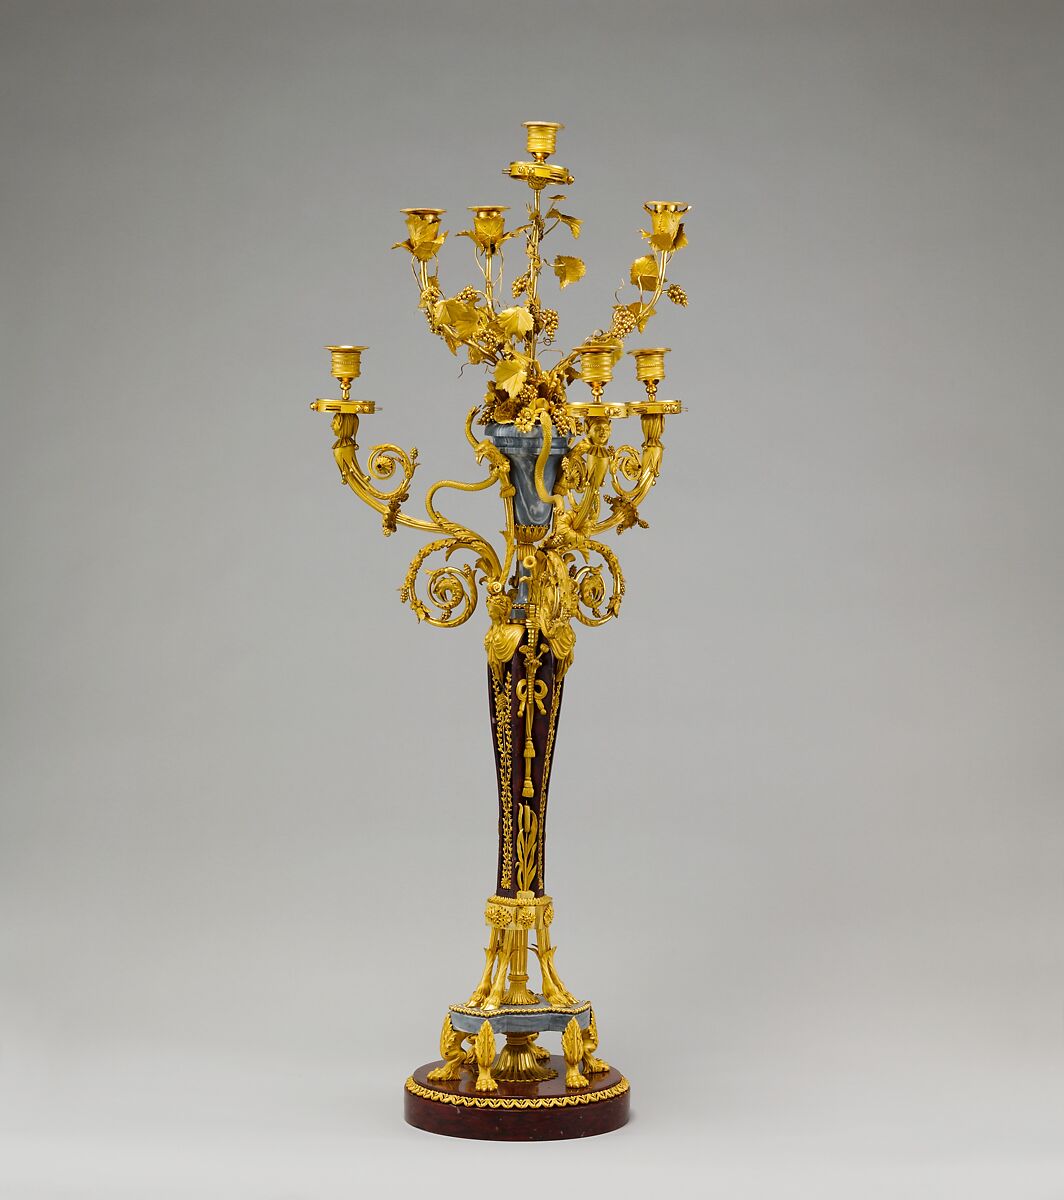 Pair of seven-light candelabra (candélabres or girandoles), Gilt bronze, griotte marble, bardiglio marble, French 